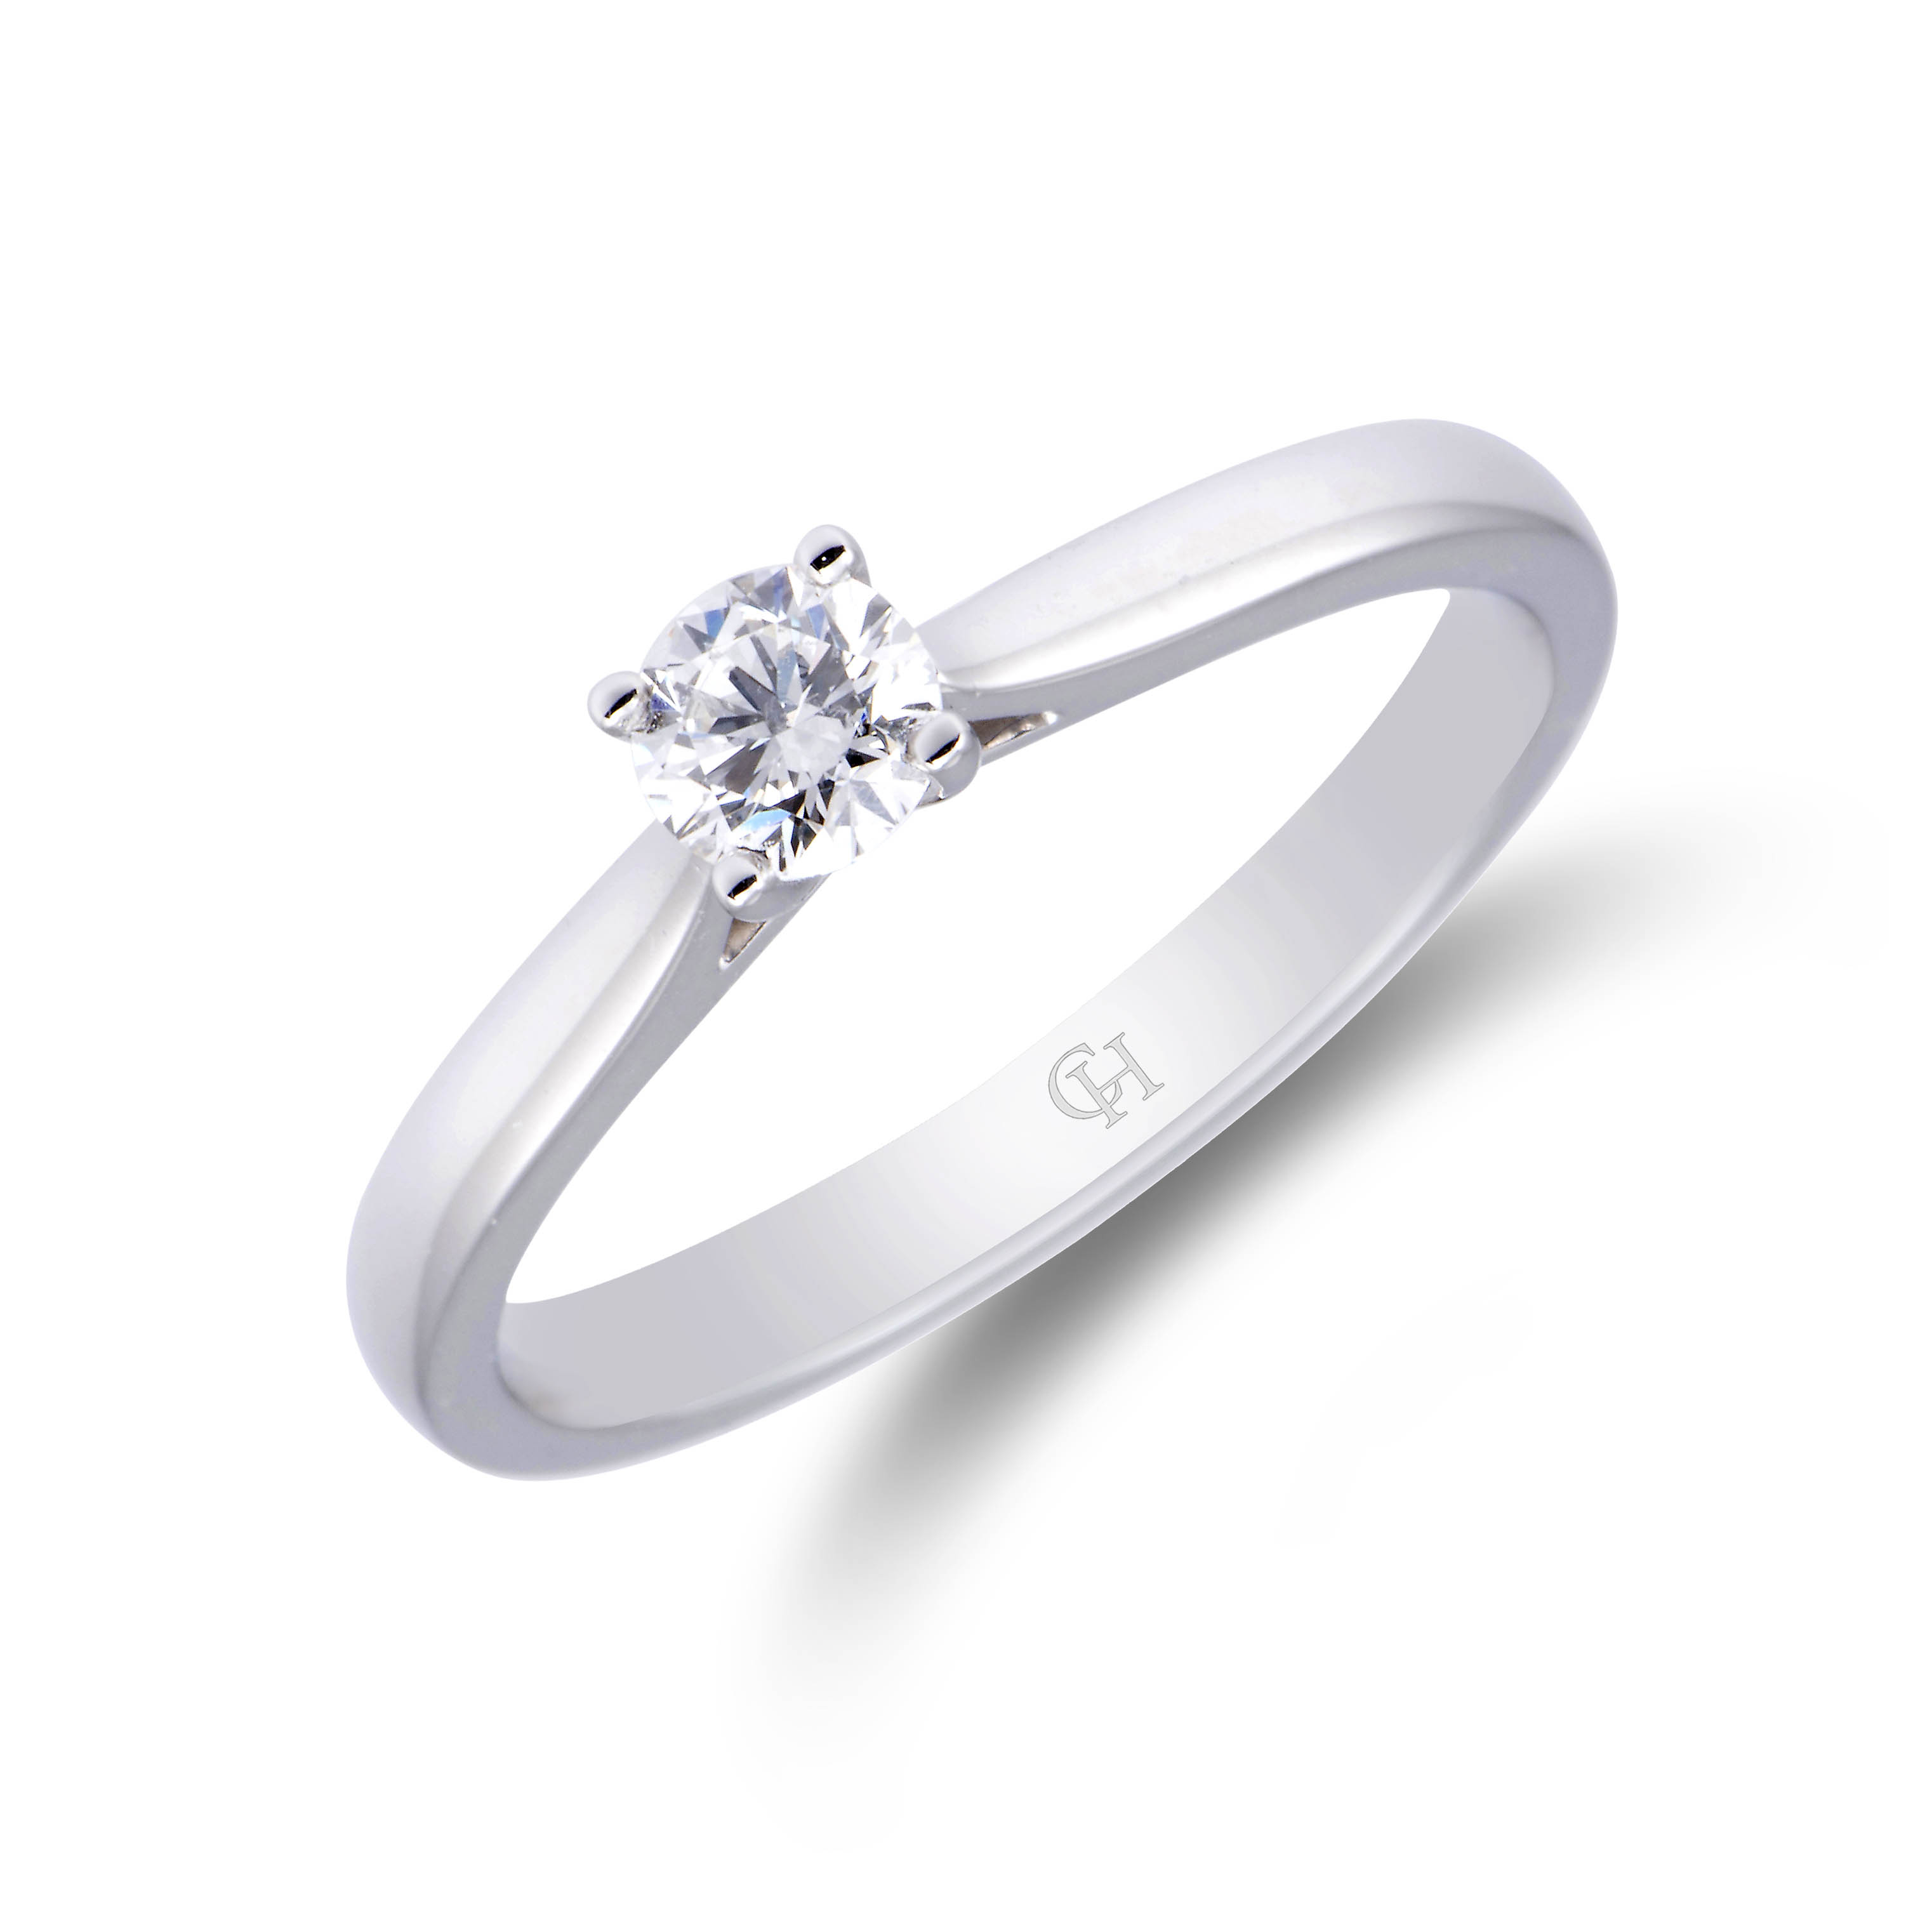 Certificated Platinum approx 0.30ct Diamond Solitaire Ring